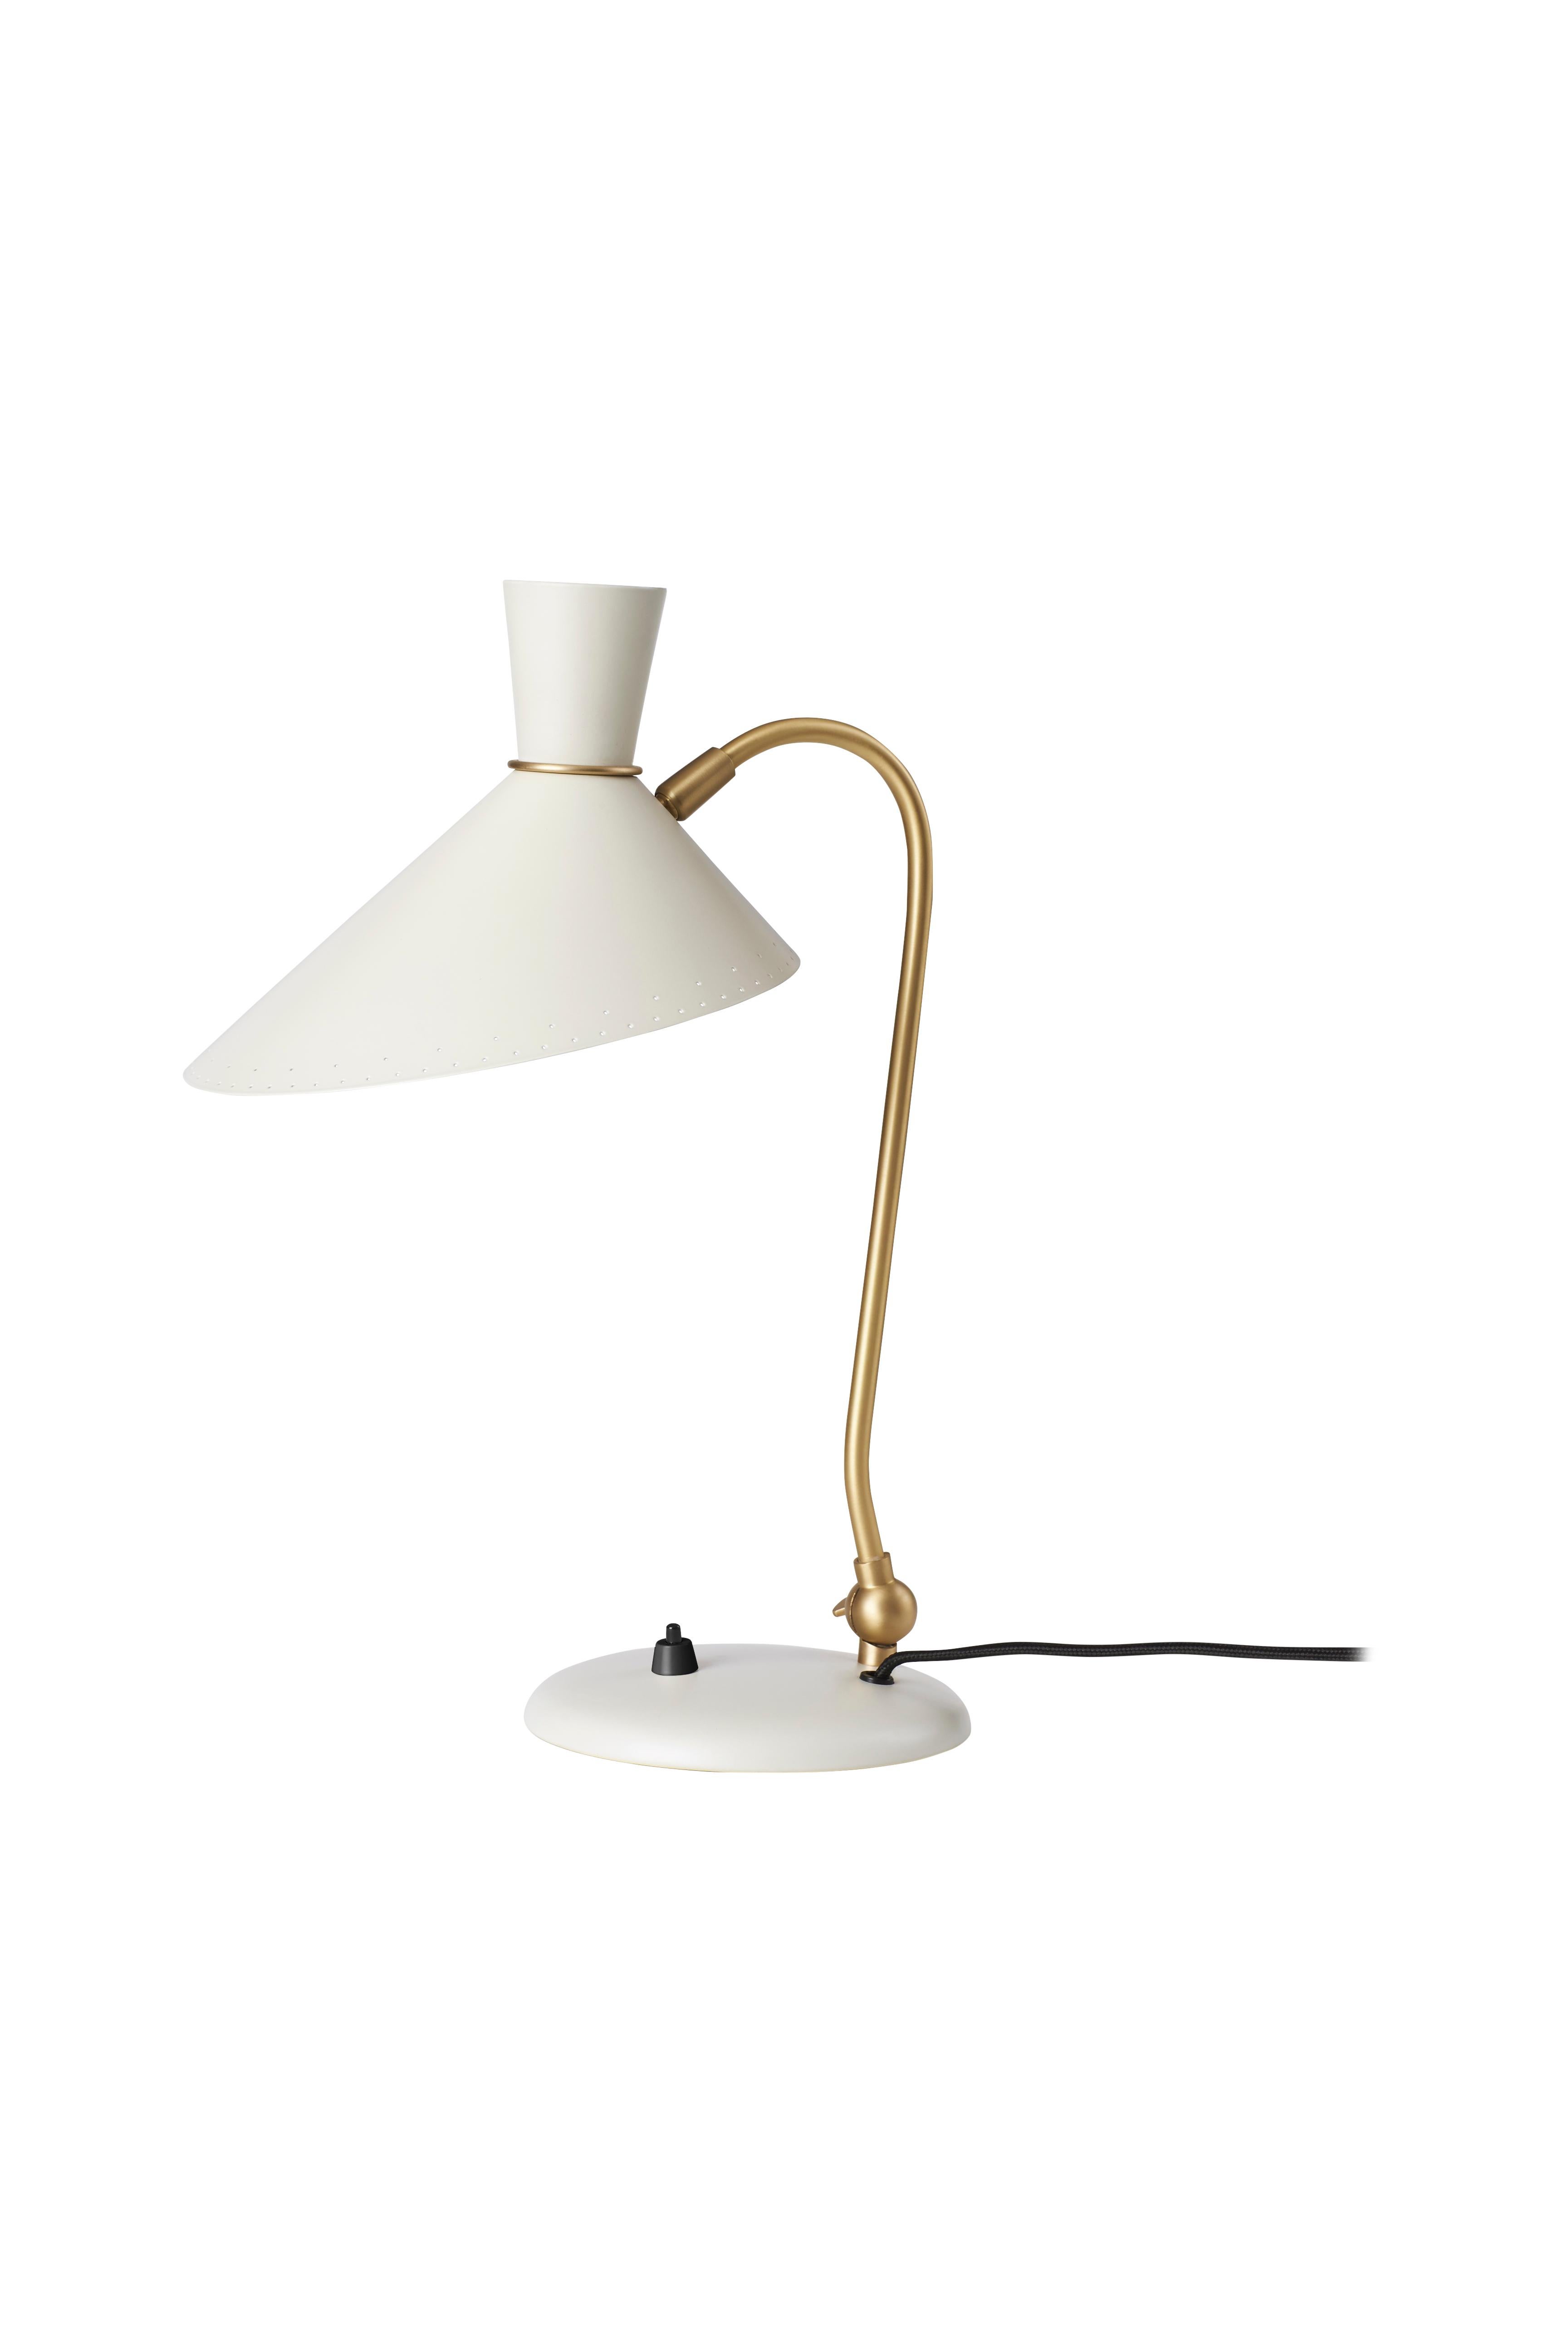 For Sale: White (Warm White) Bloom Table Lamp, by Svend Aage Holm-Sørensen from Warm Nordic